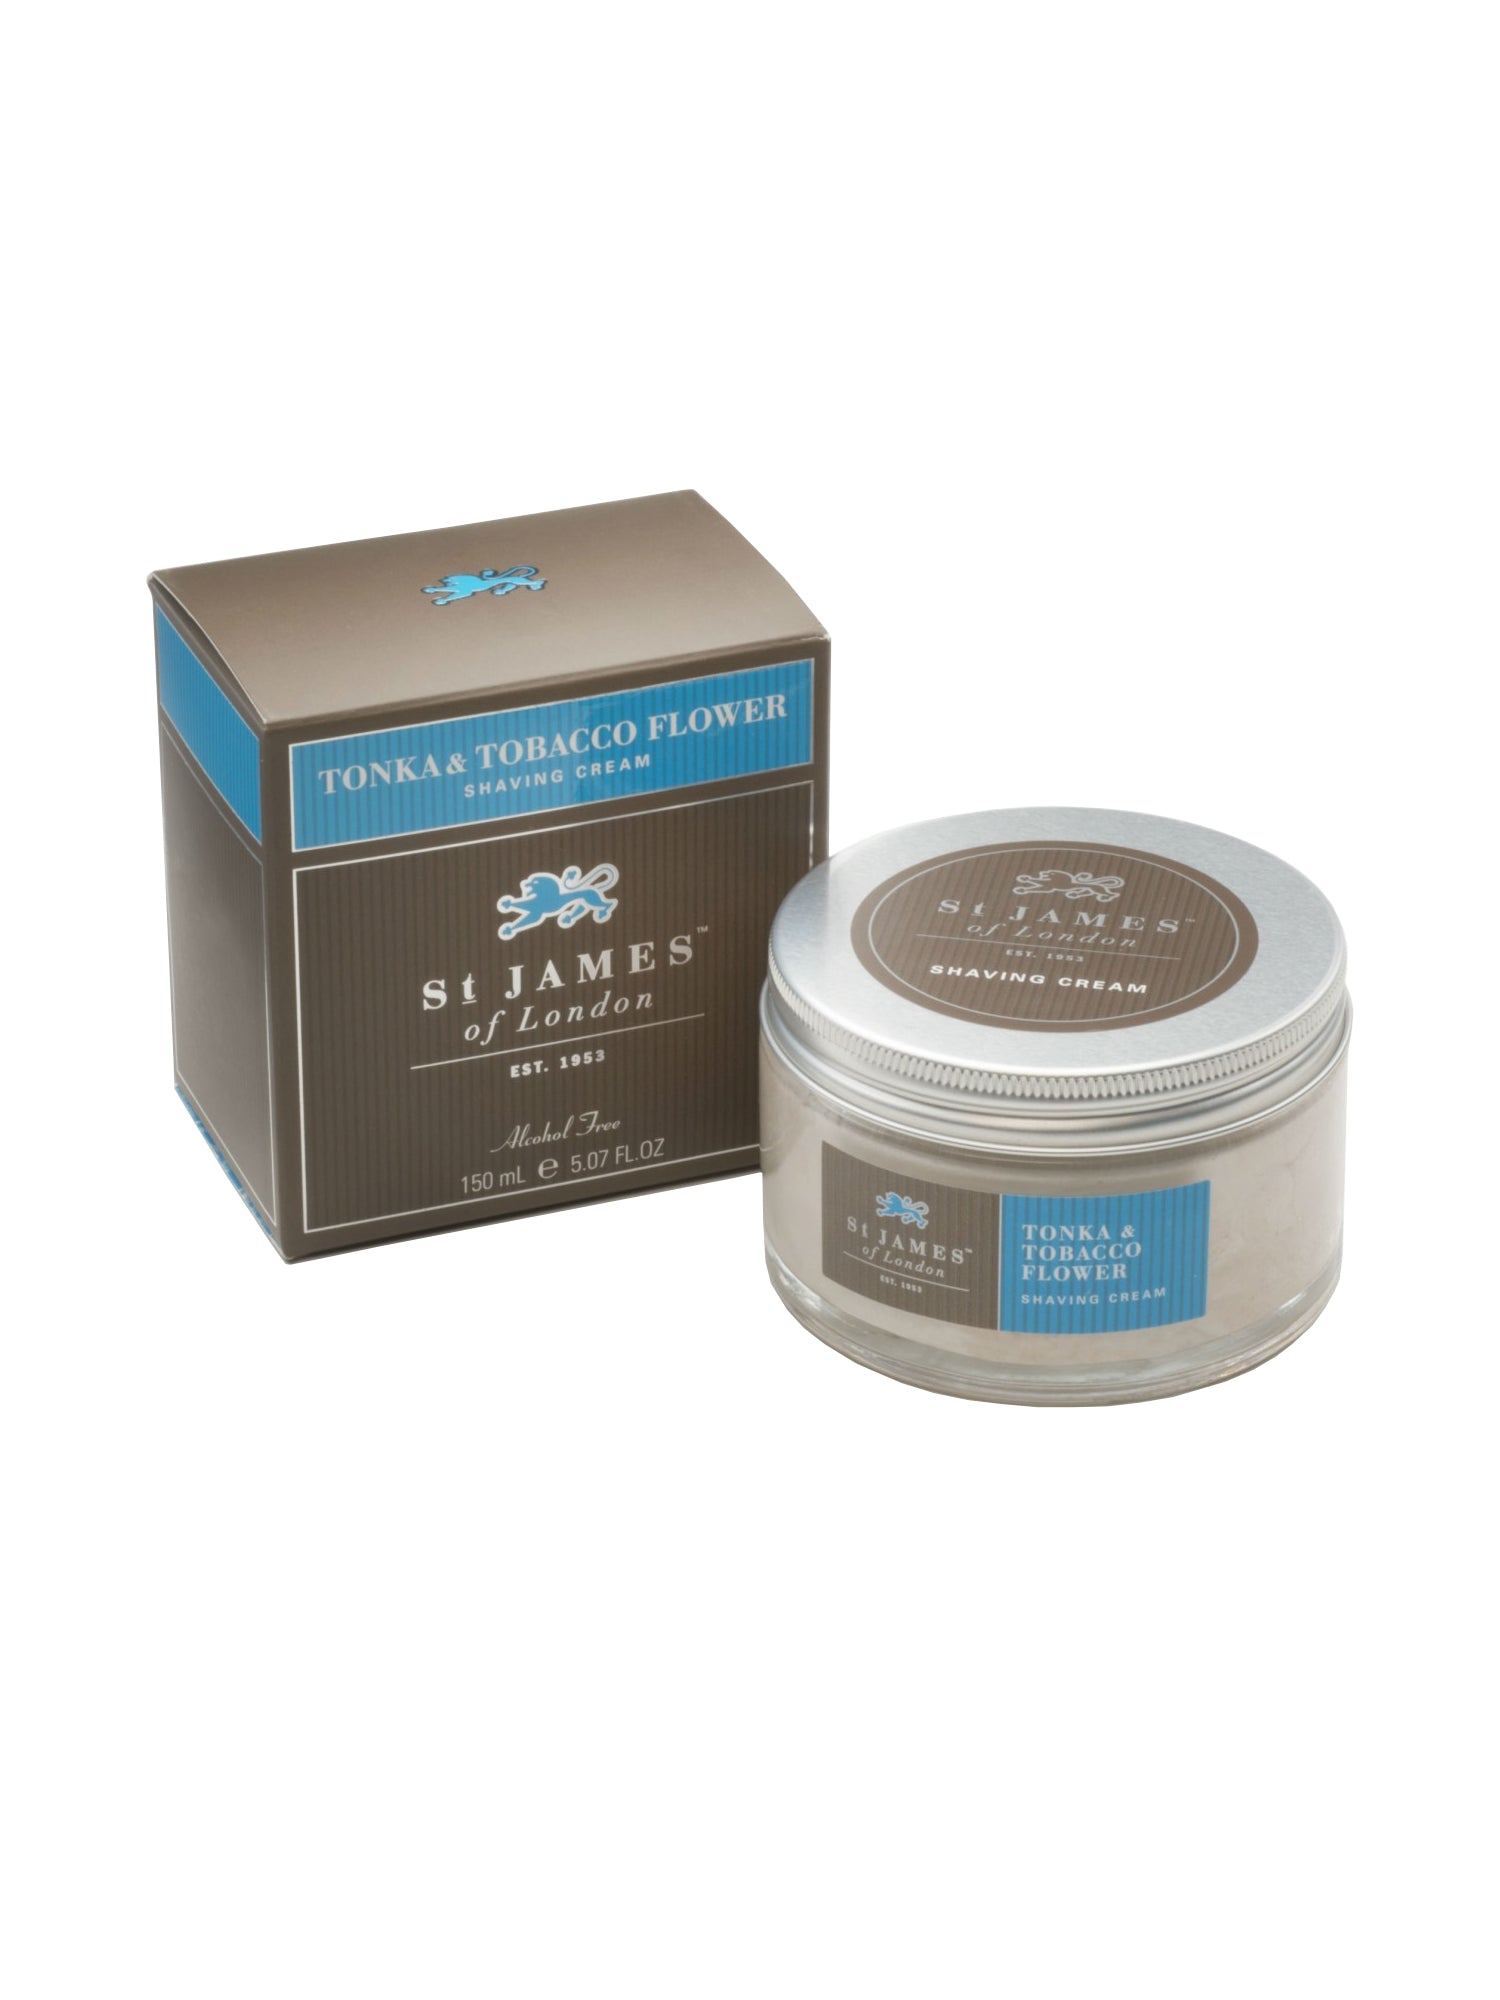 St James of London Tonka and Tobacco Flower Shave Cream